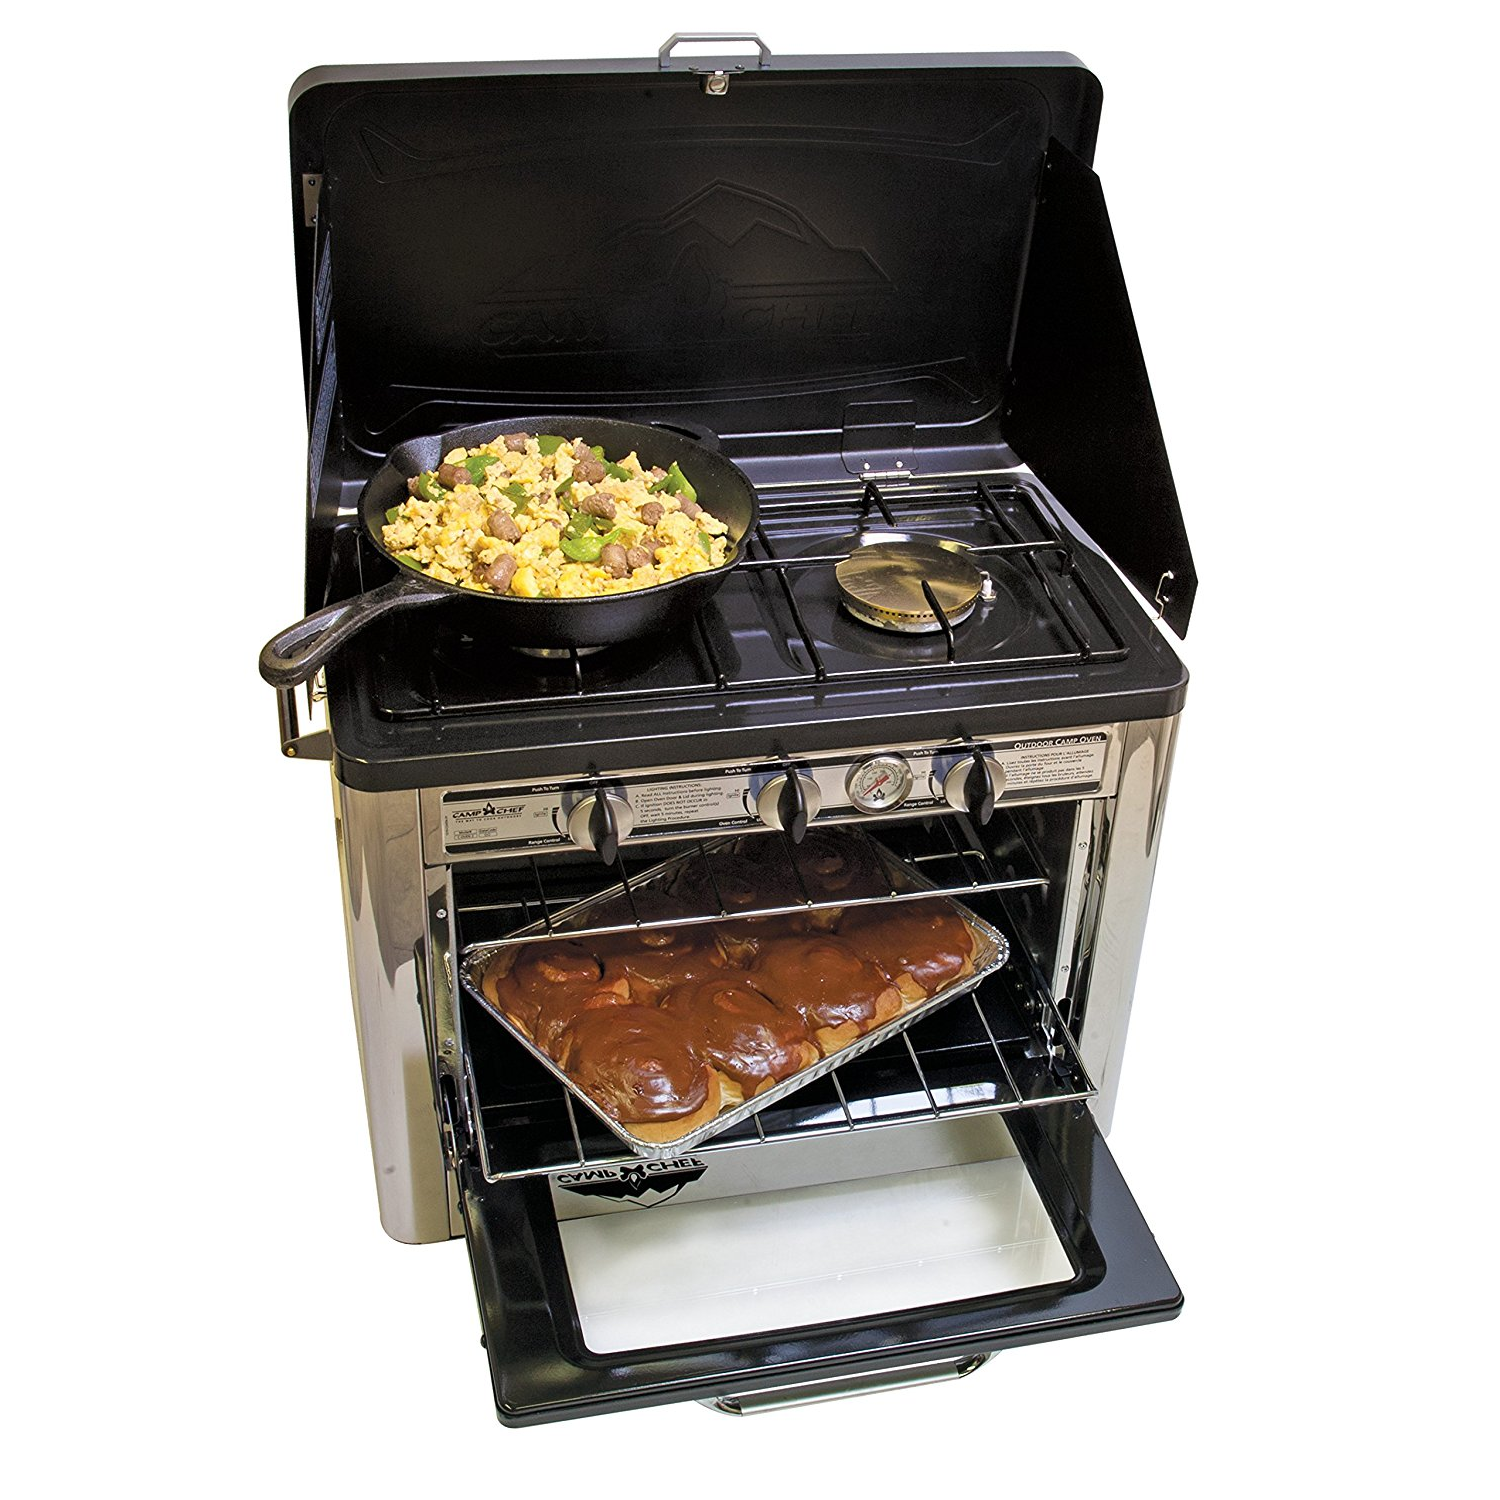 Camp Chef Outdoor Camp Oven Only $209.17 Shipped!